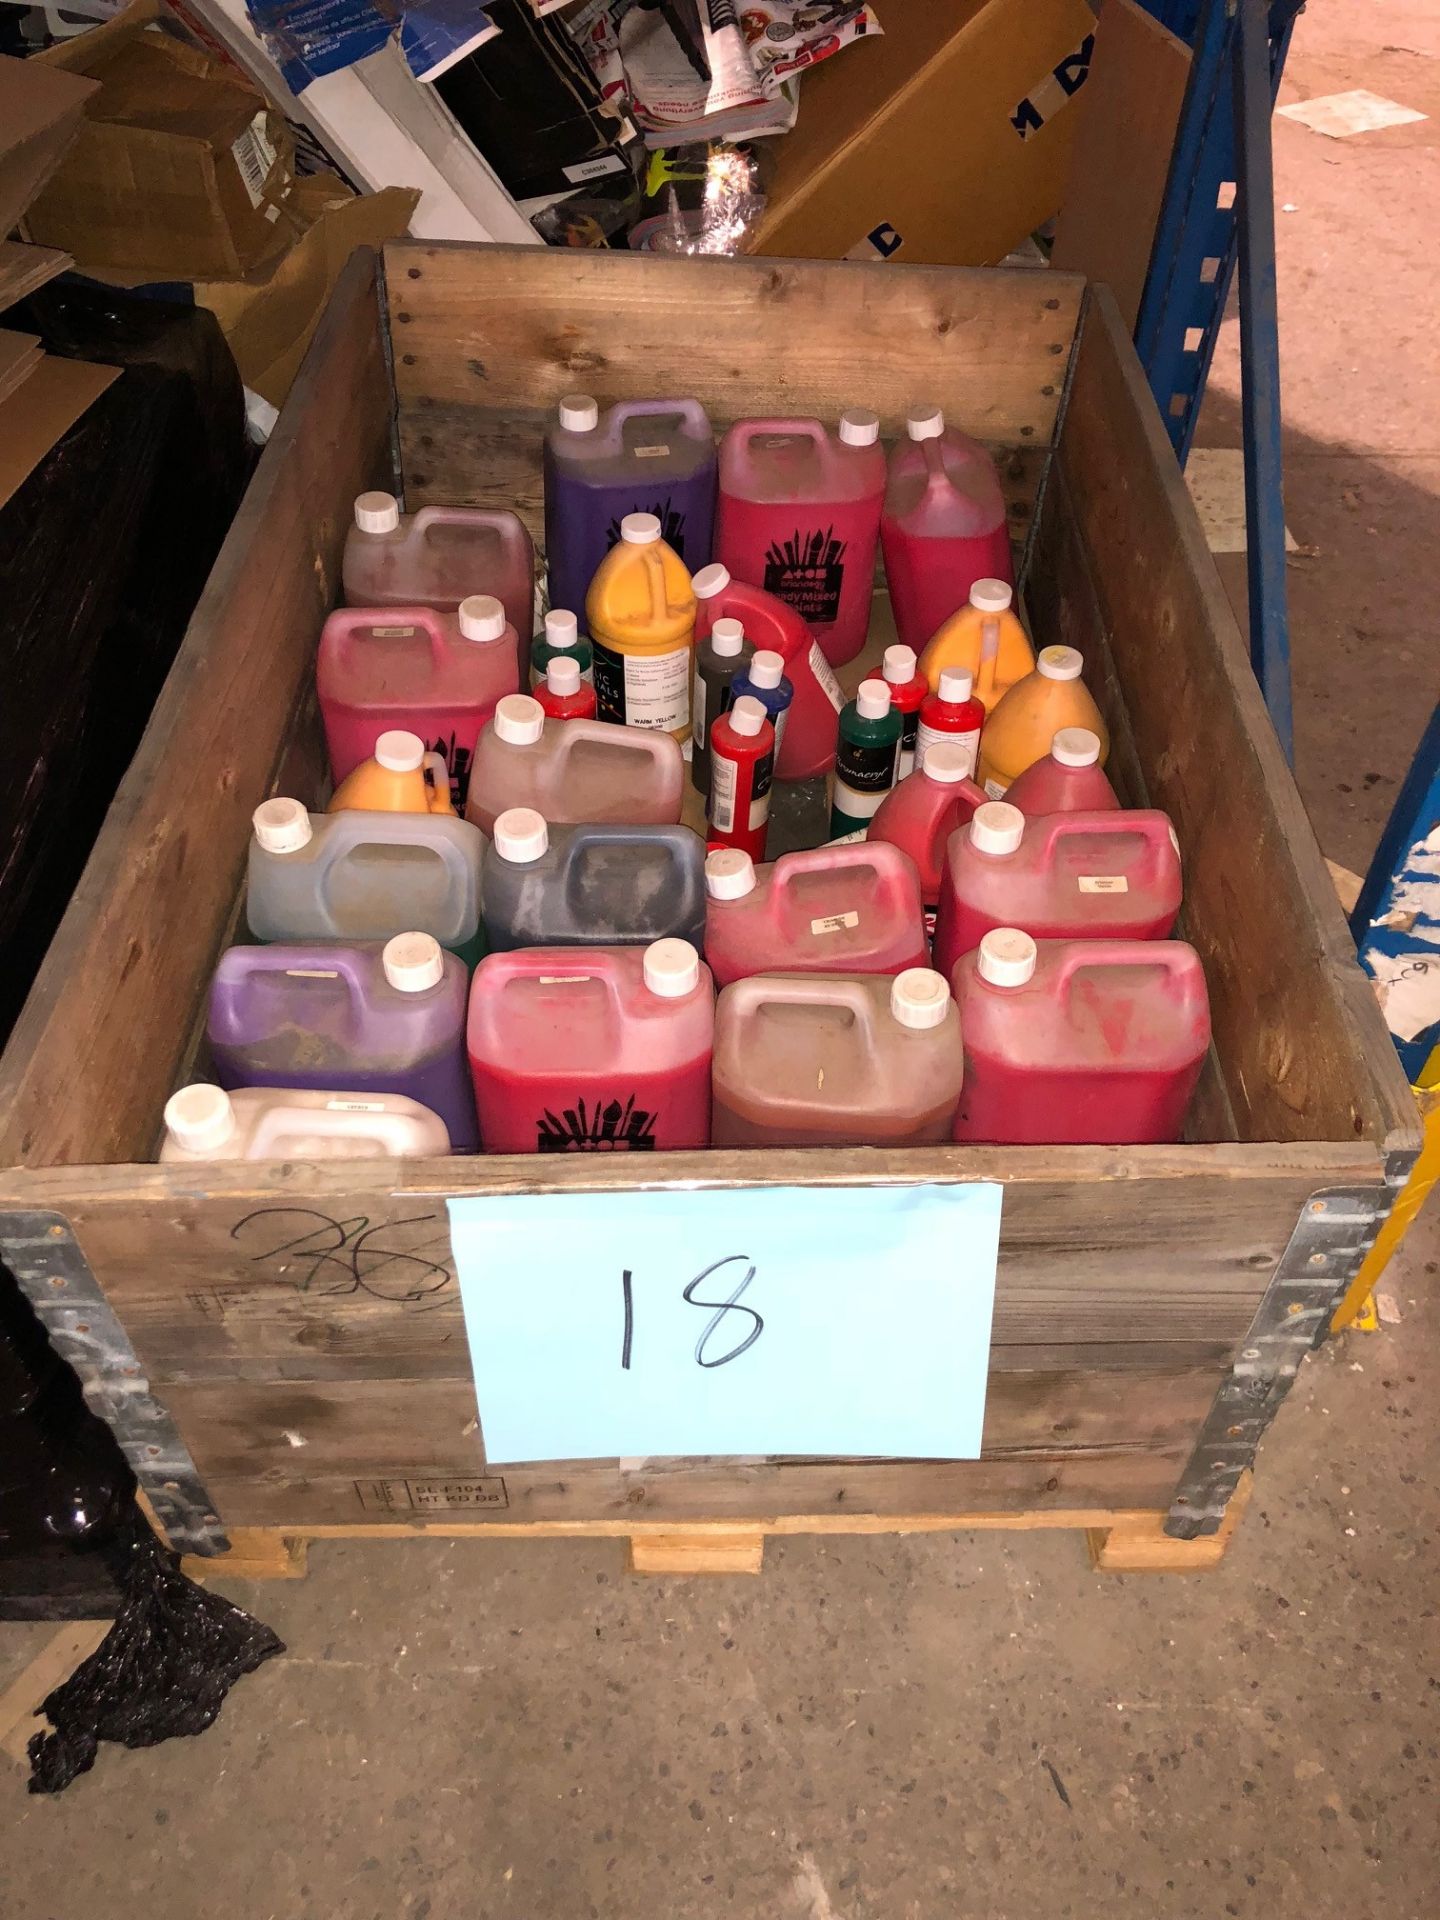 1 x Pallet of Mixed Brian Clegg/Chromacryl Arts & Craft Paints - Approximately 30 Bottles in Total -